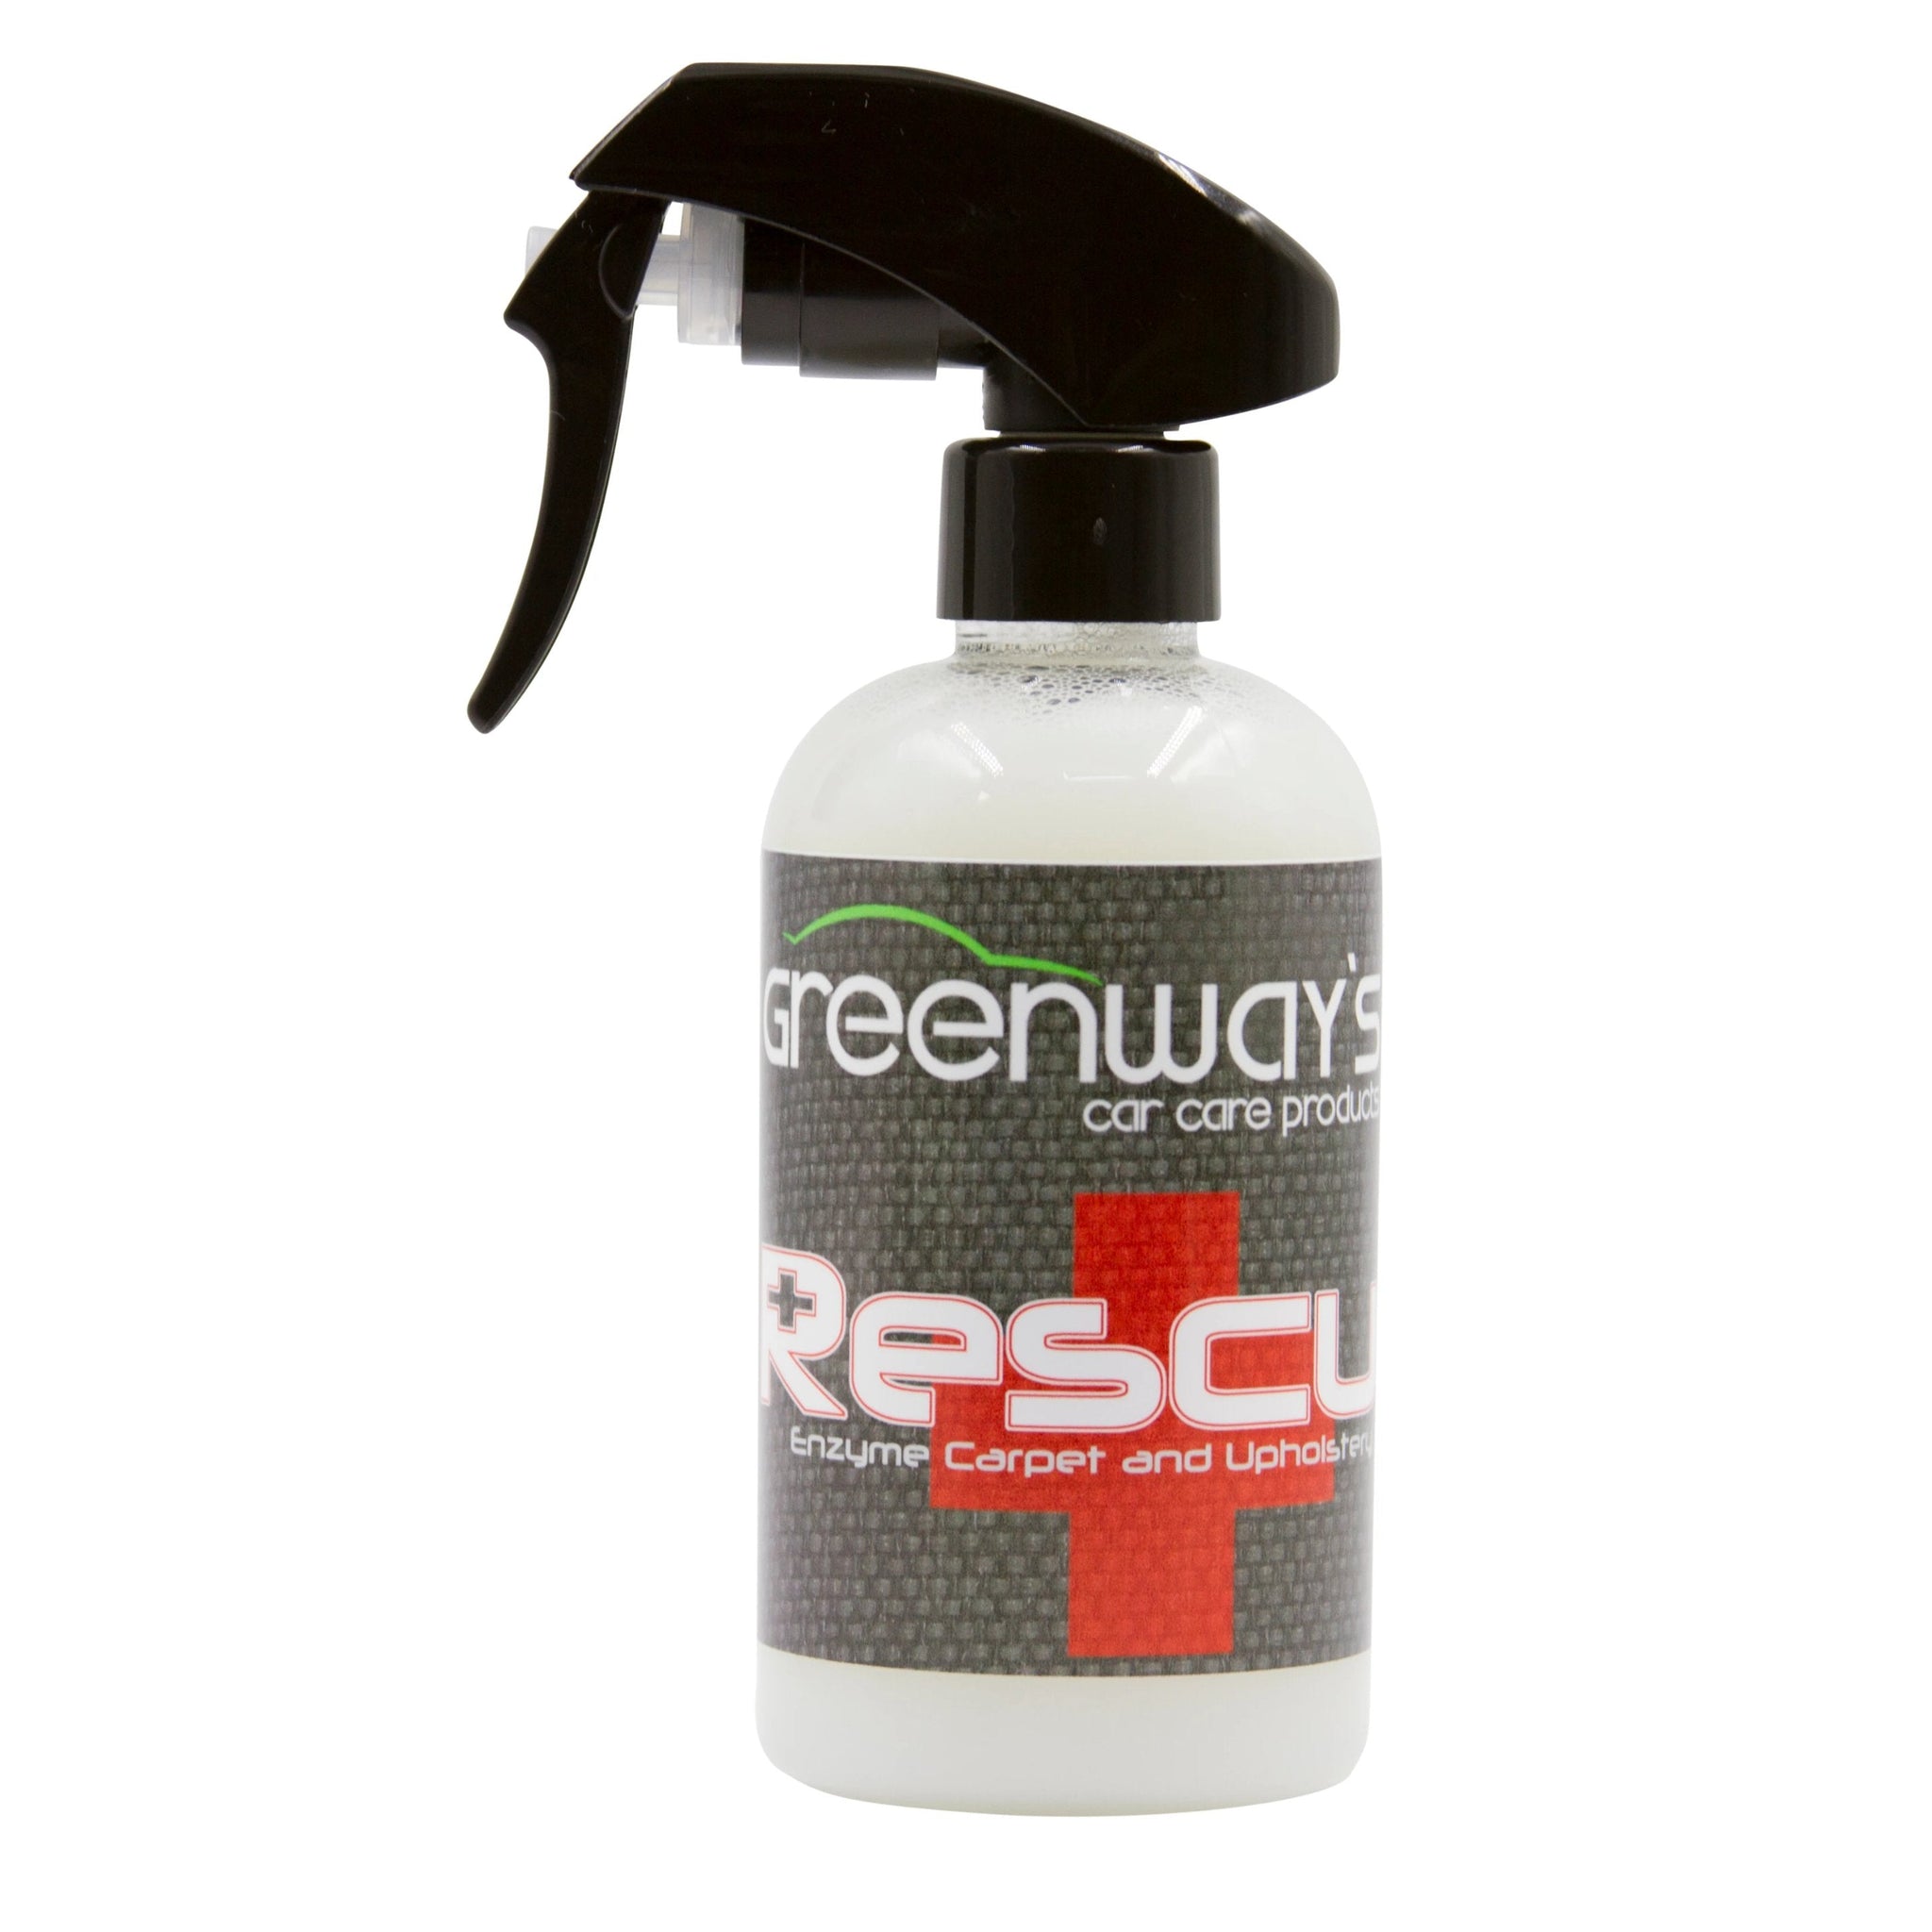 Greenway’s Car Care Products, Rescue, carpet and upholstery deodorizing cleaner for mold, vomit, feces, urine, more. 8 ounces.